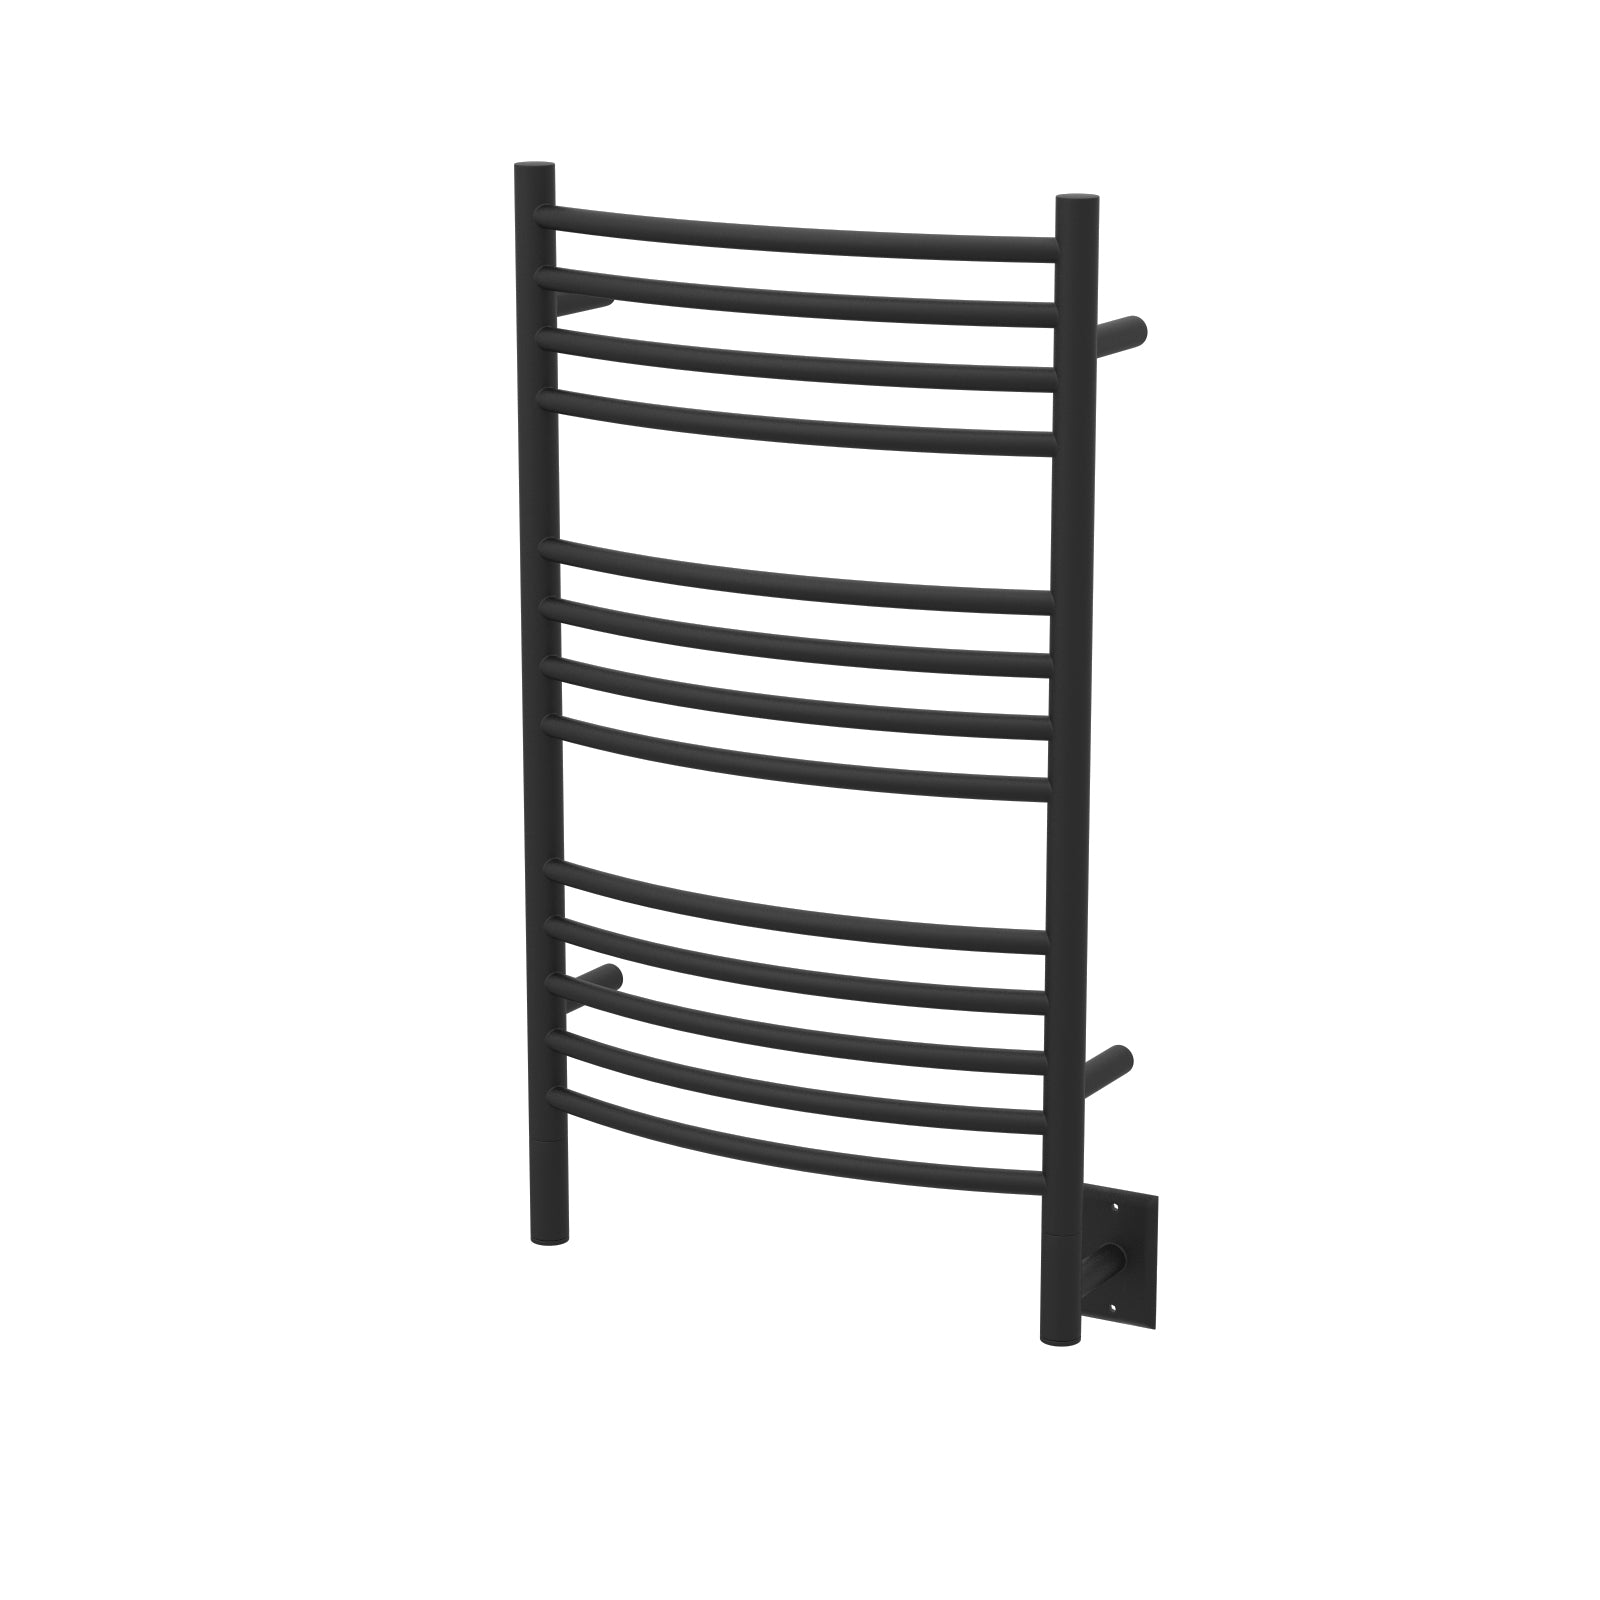 Amba Jeeves Model C Curved 13 Bar Hardwired Towel Warmer